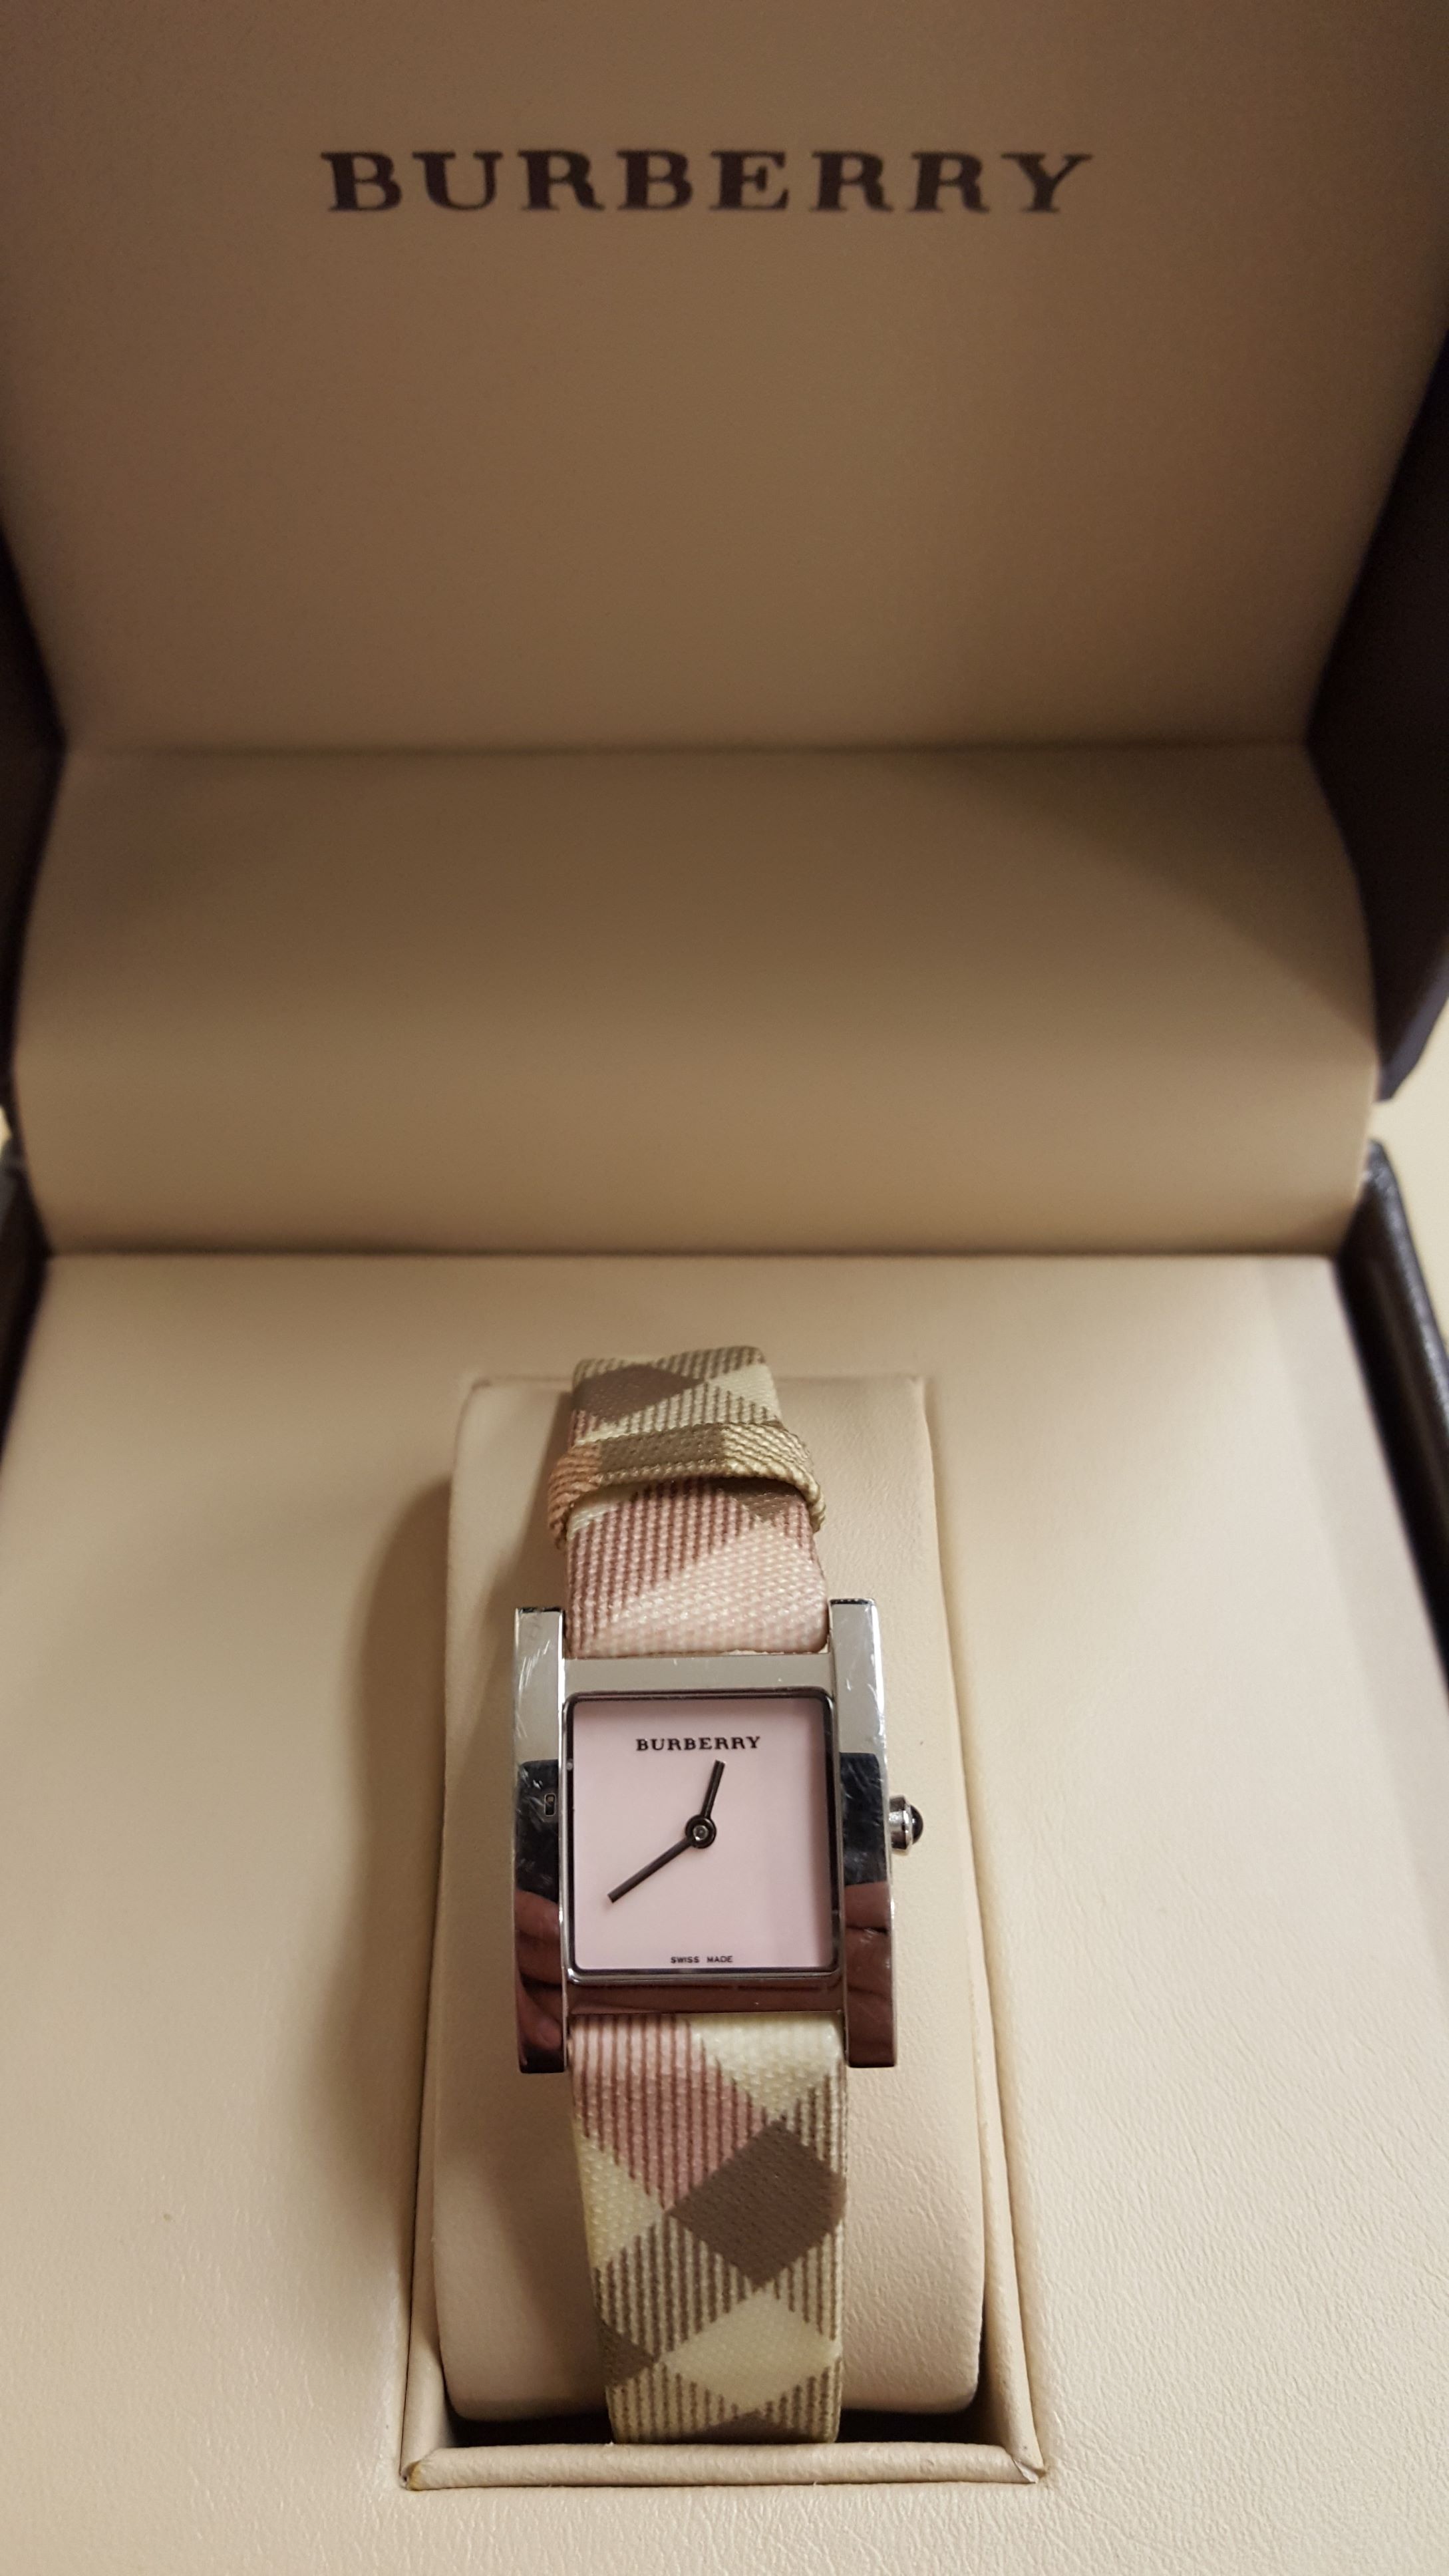 A ladies Burberry wrist watch, model no.BU4311, with original box and papers - Image 2 of 2